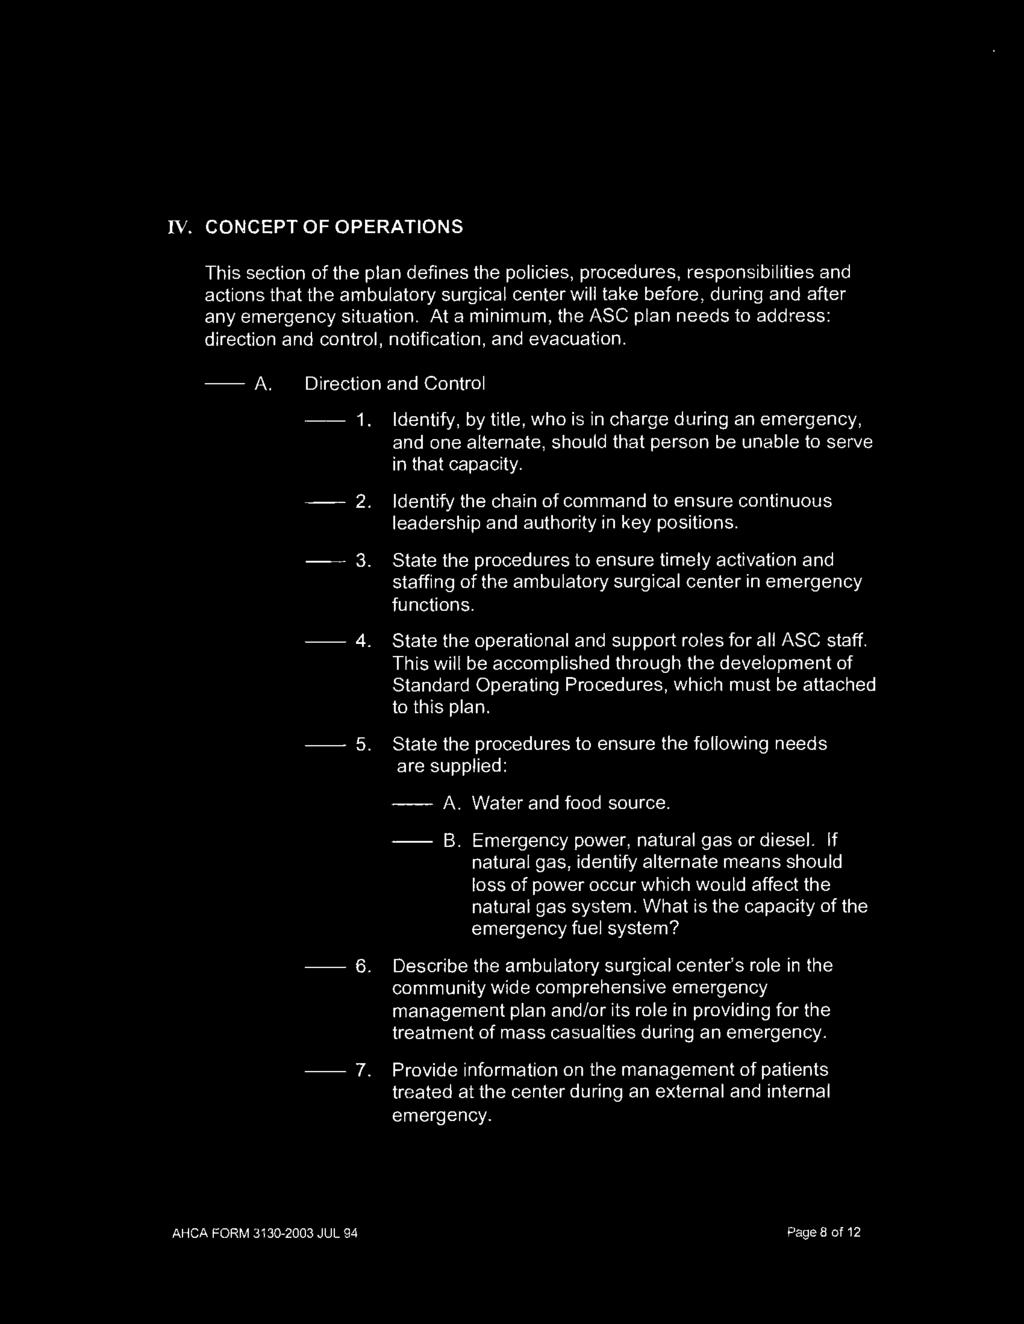 IV. CONCEPT OF O~ERATIONS This section of the plan defines the policies, procedures, responsibilities and actions that the ambulatory surgical center will take before, during and after any emergency